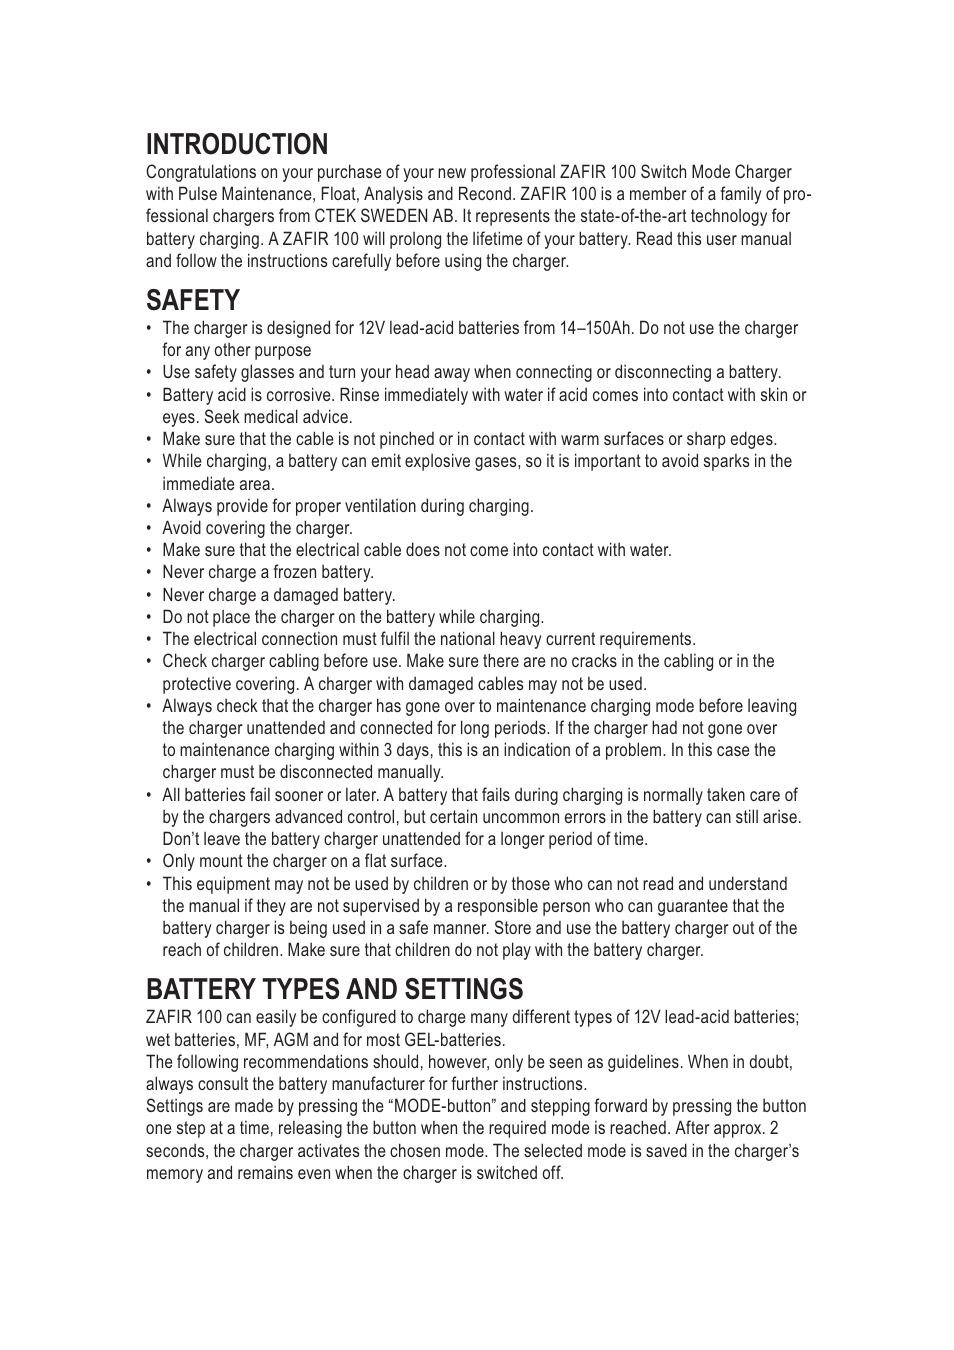 Introduction, Safety, Battery types and settings | CTEK ZAFIR 100 User  Manual | Page 2 / 9